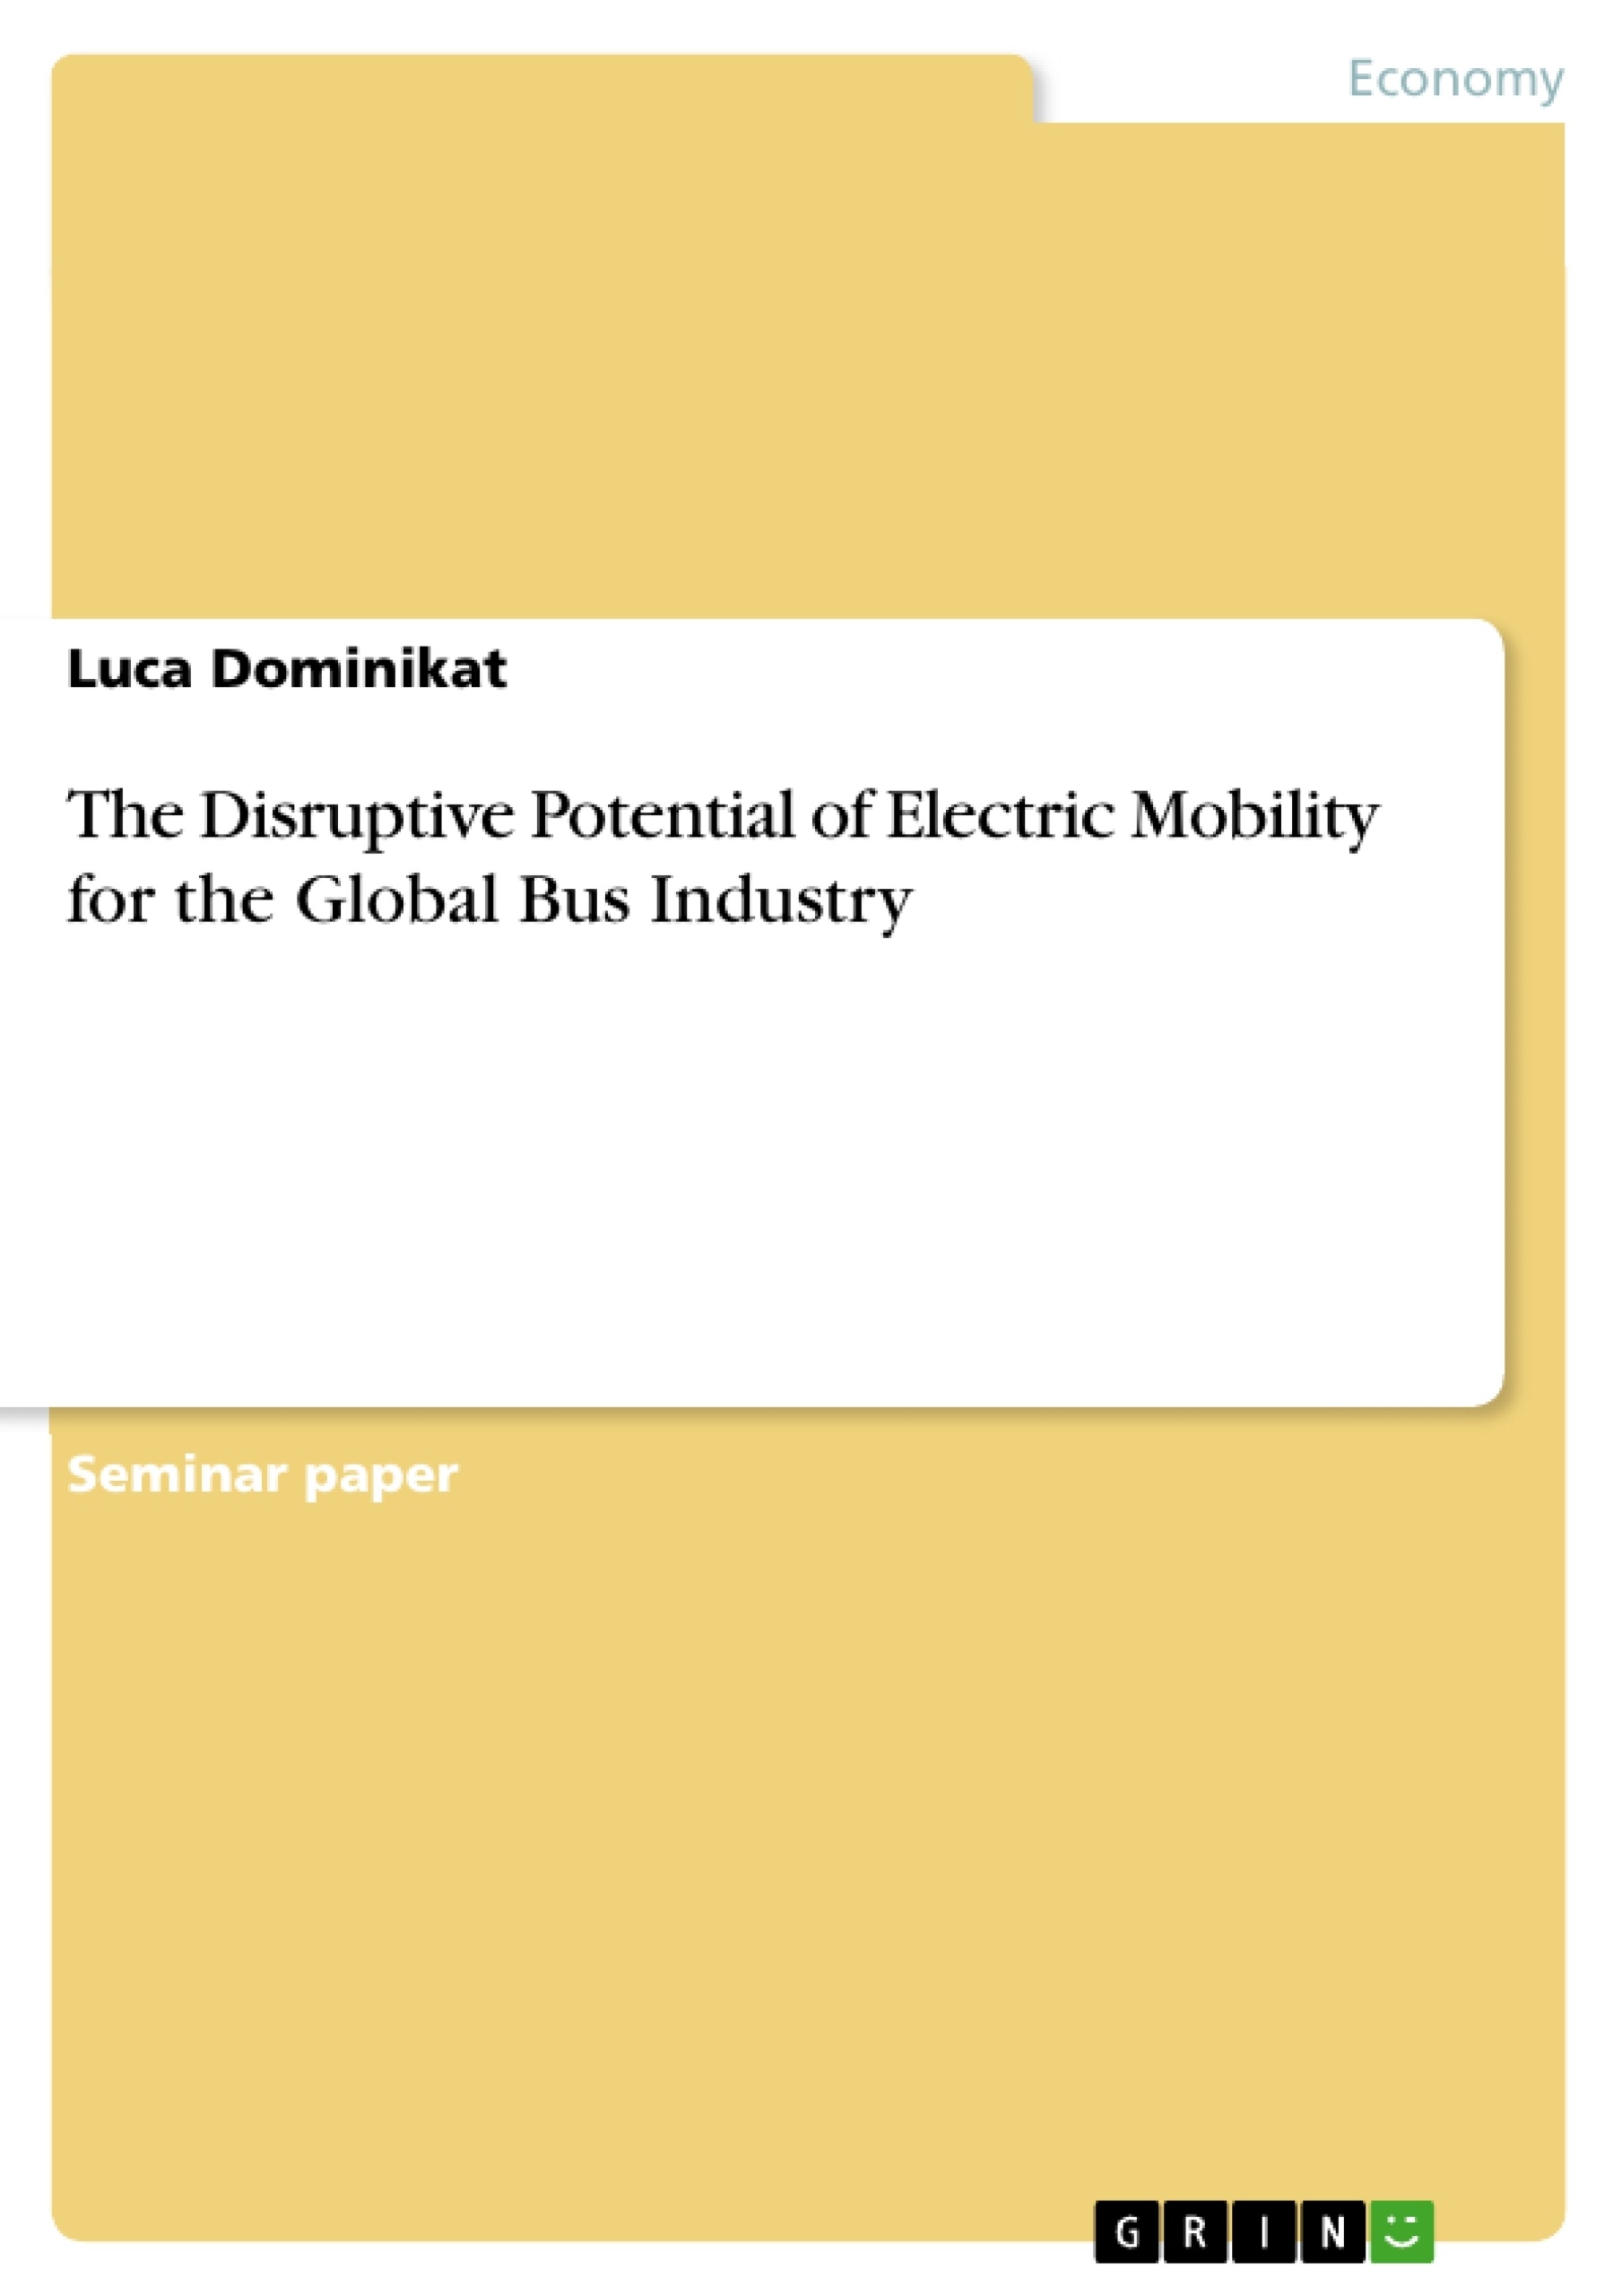 Title: The Disruptive Potential of Electric Mobility for the Global Bus Industry